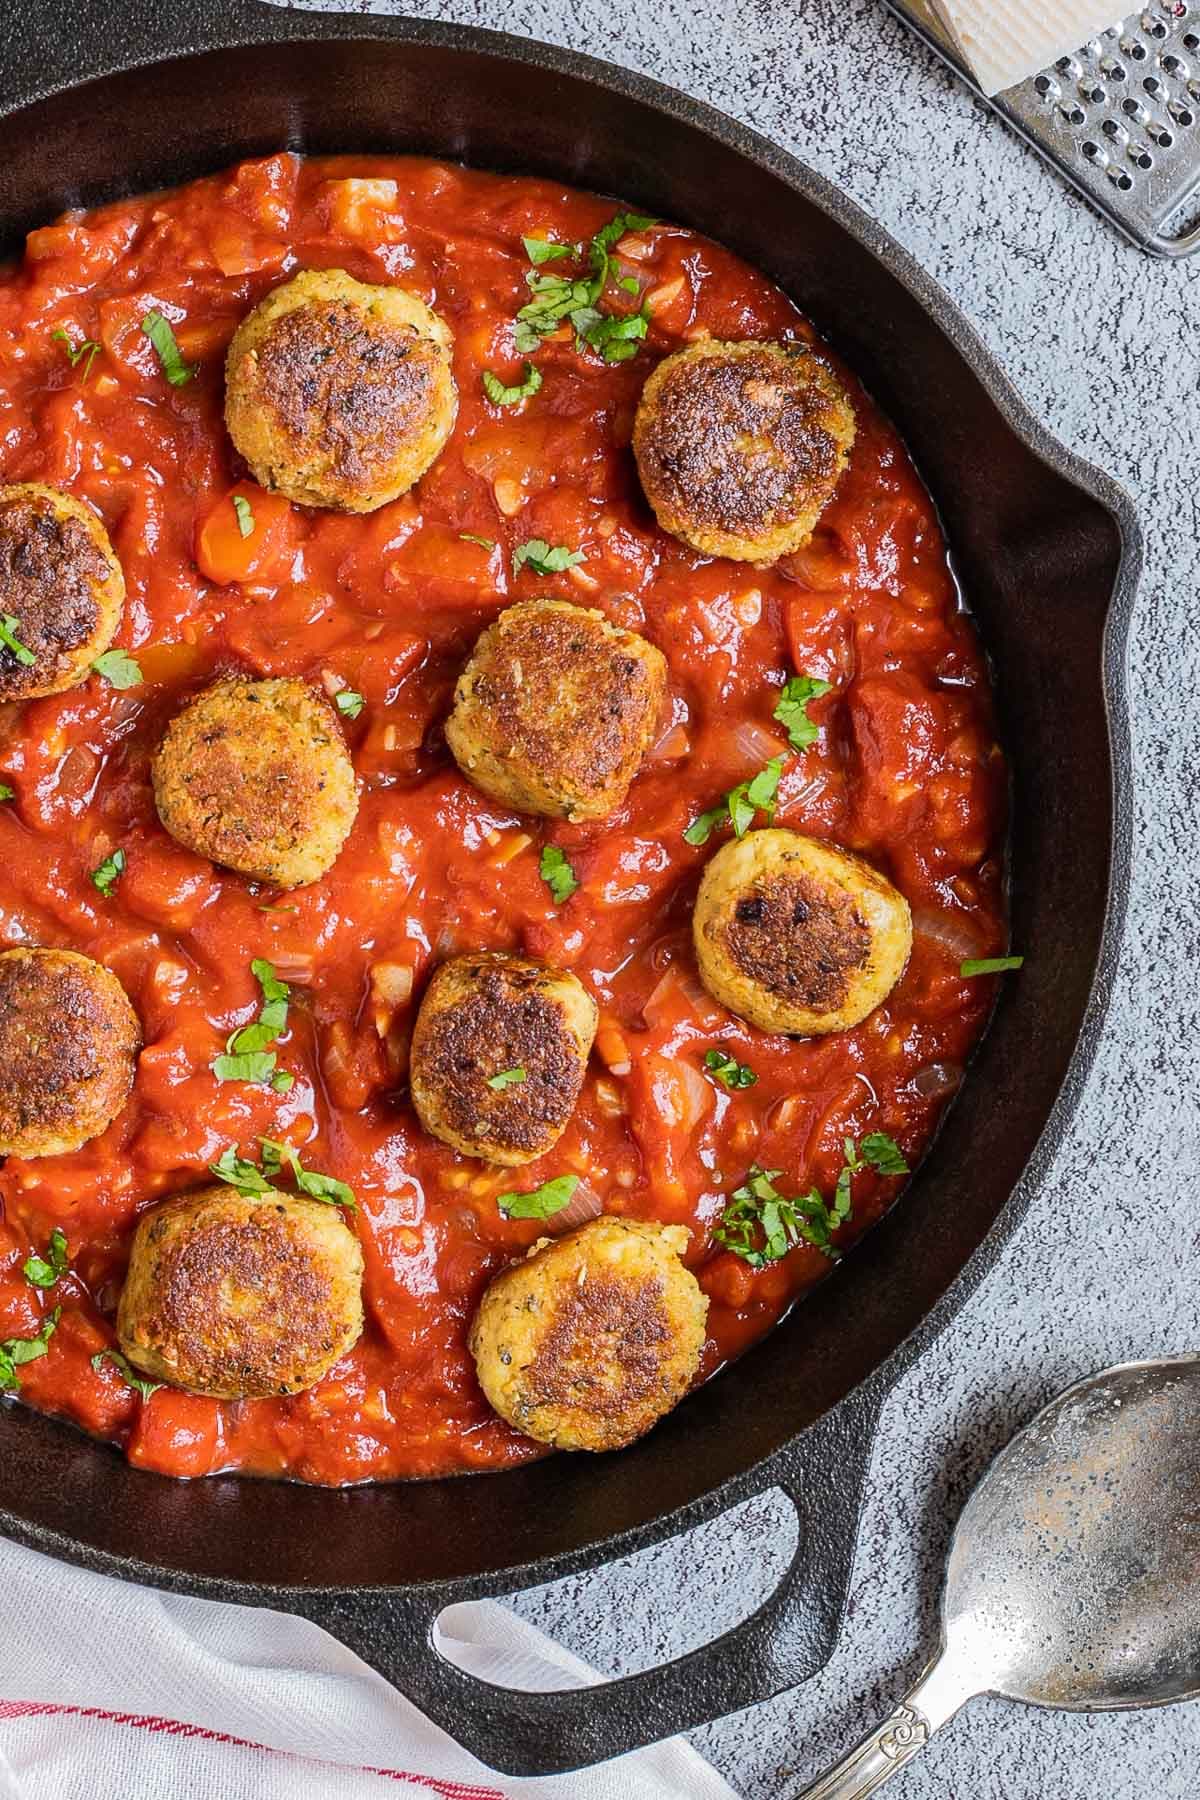 Black cast iron skillet with red marinara sauce and crispy brown tofu meatballs. It is sprinkled with chopped fresh green herbs.